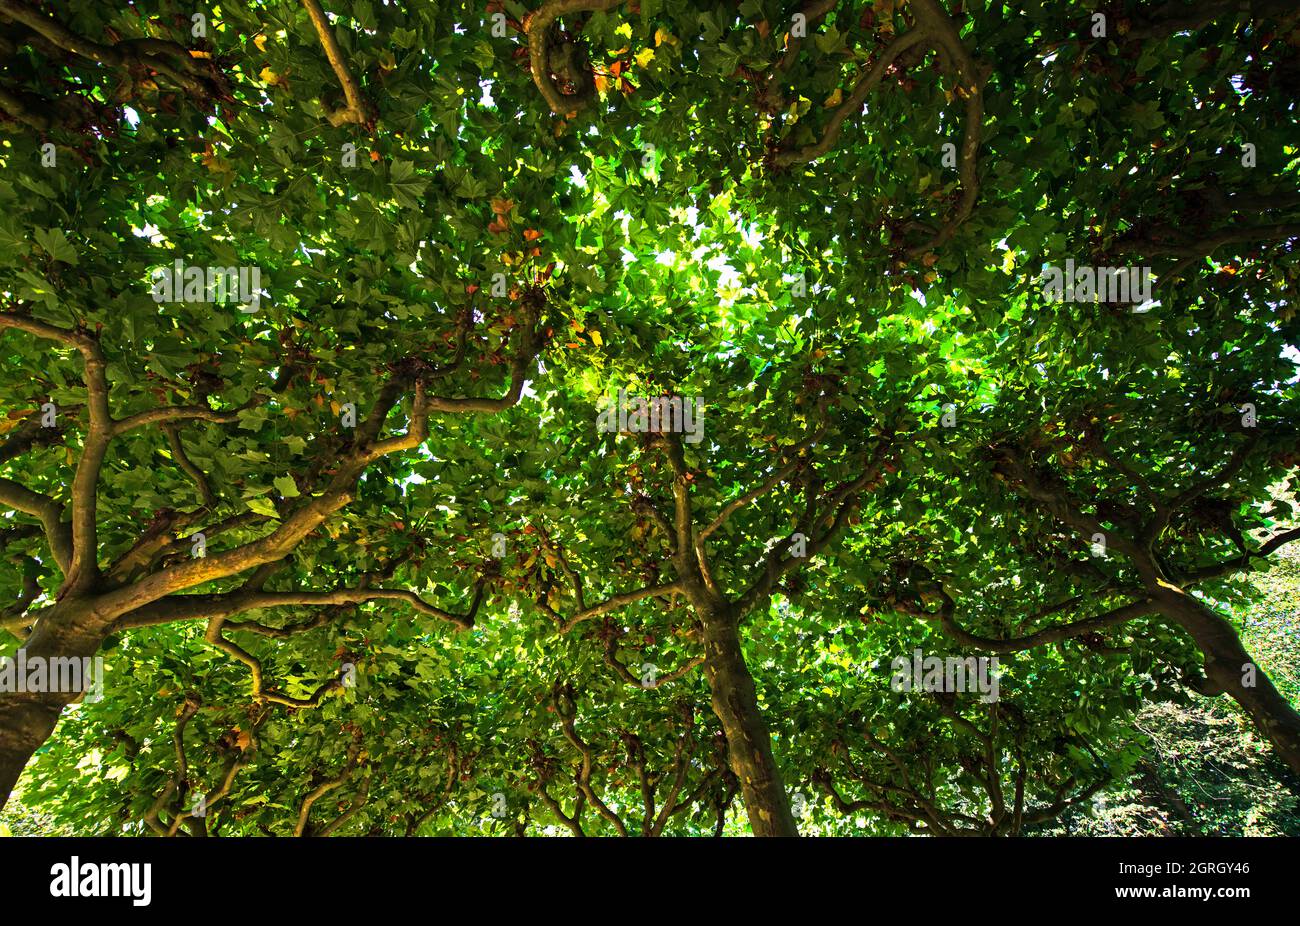 Environment green living landscapes Stock Photo